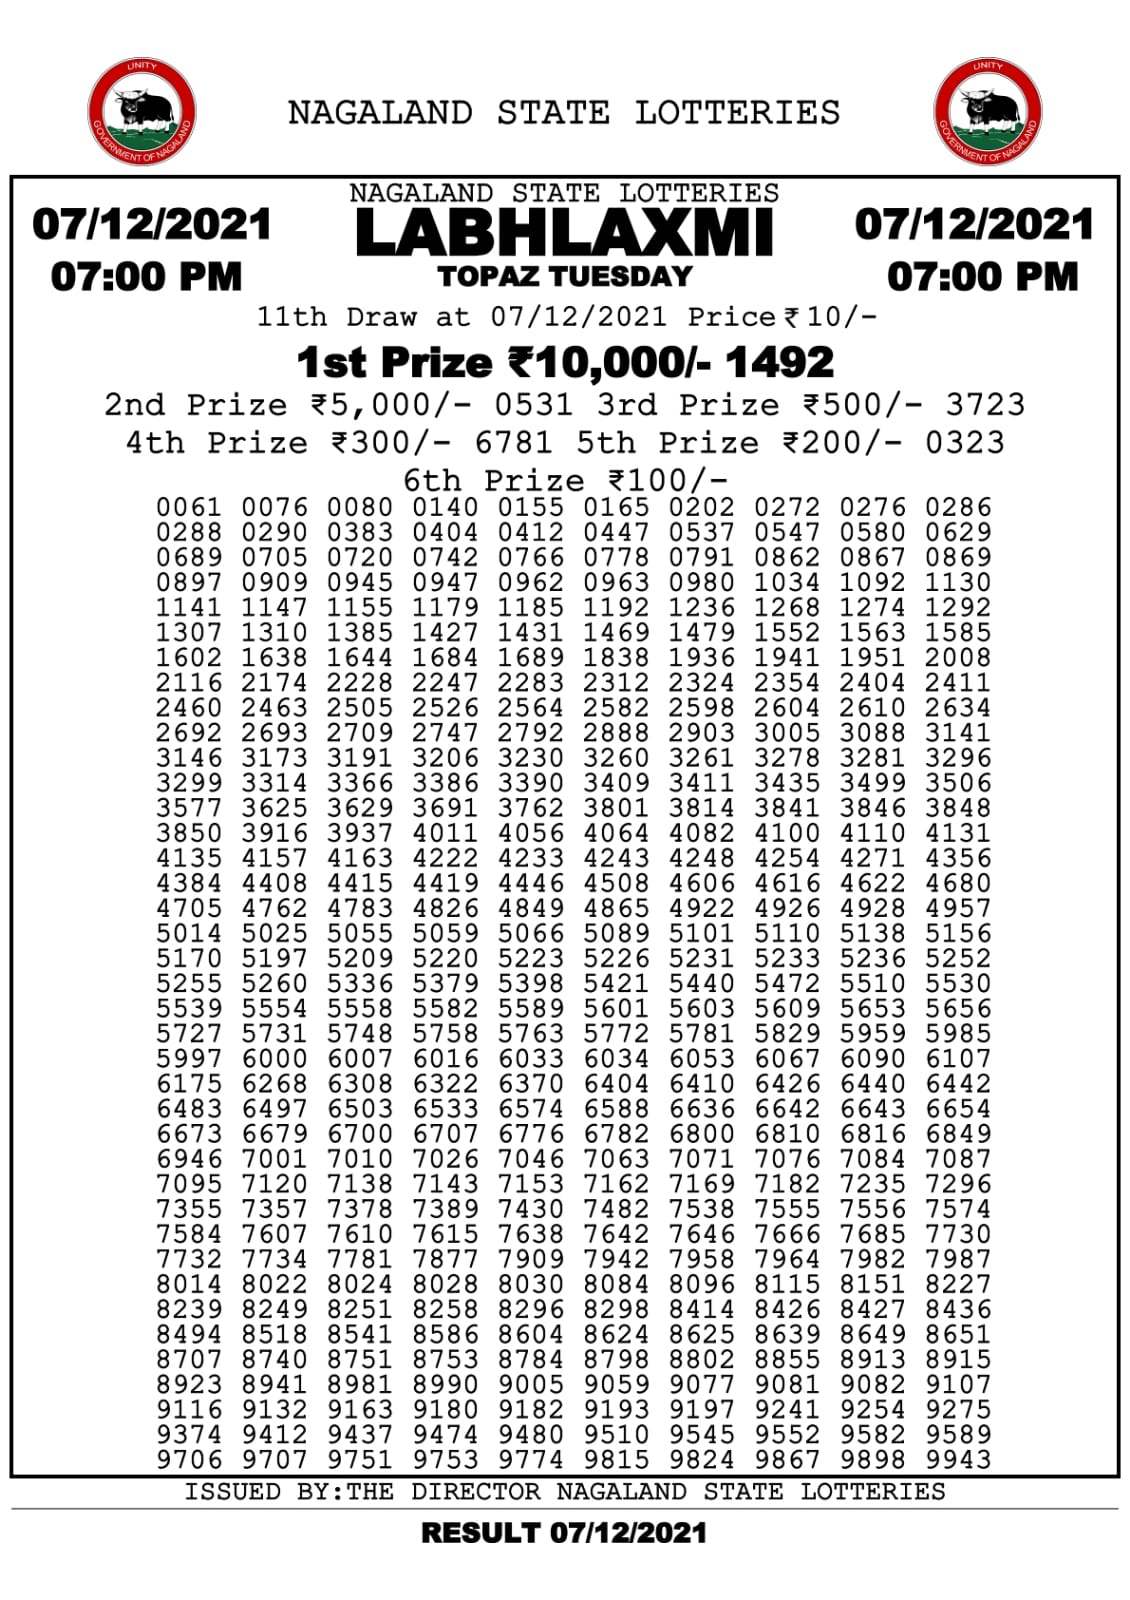 Labhlaxmi 7.00pm Lottery Result 07.12.2021